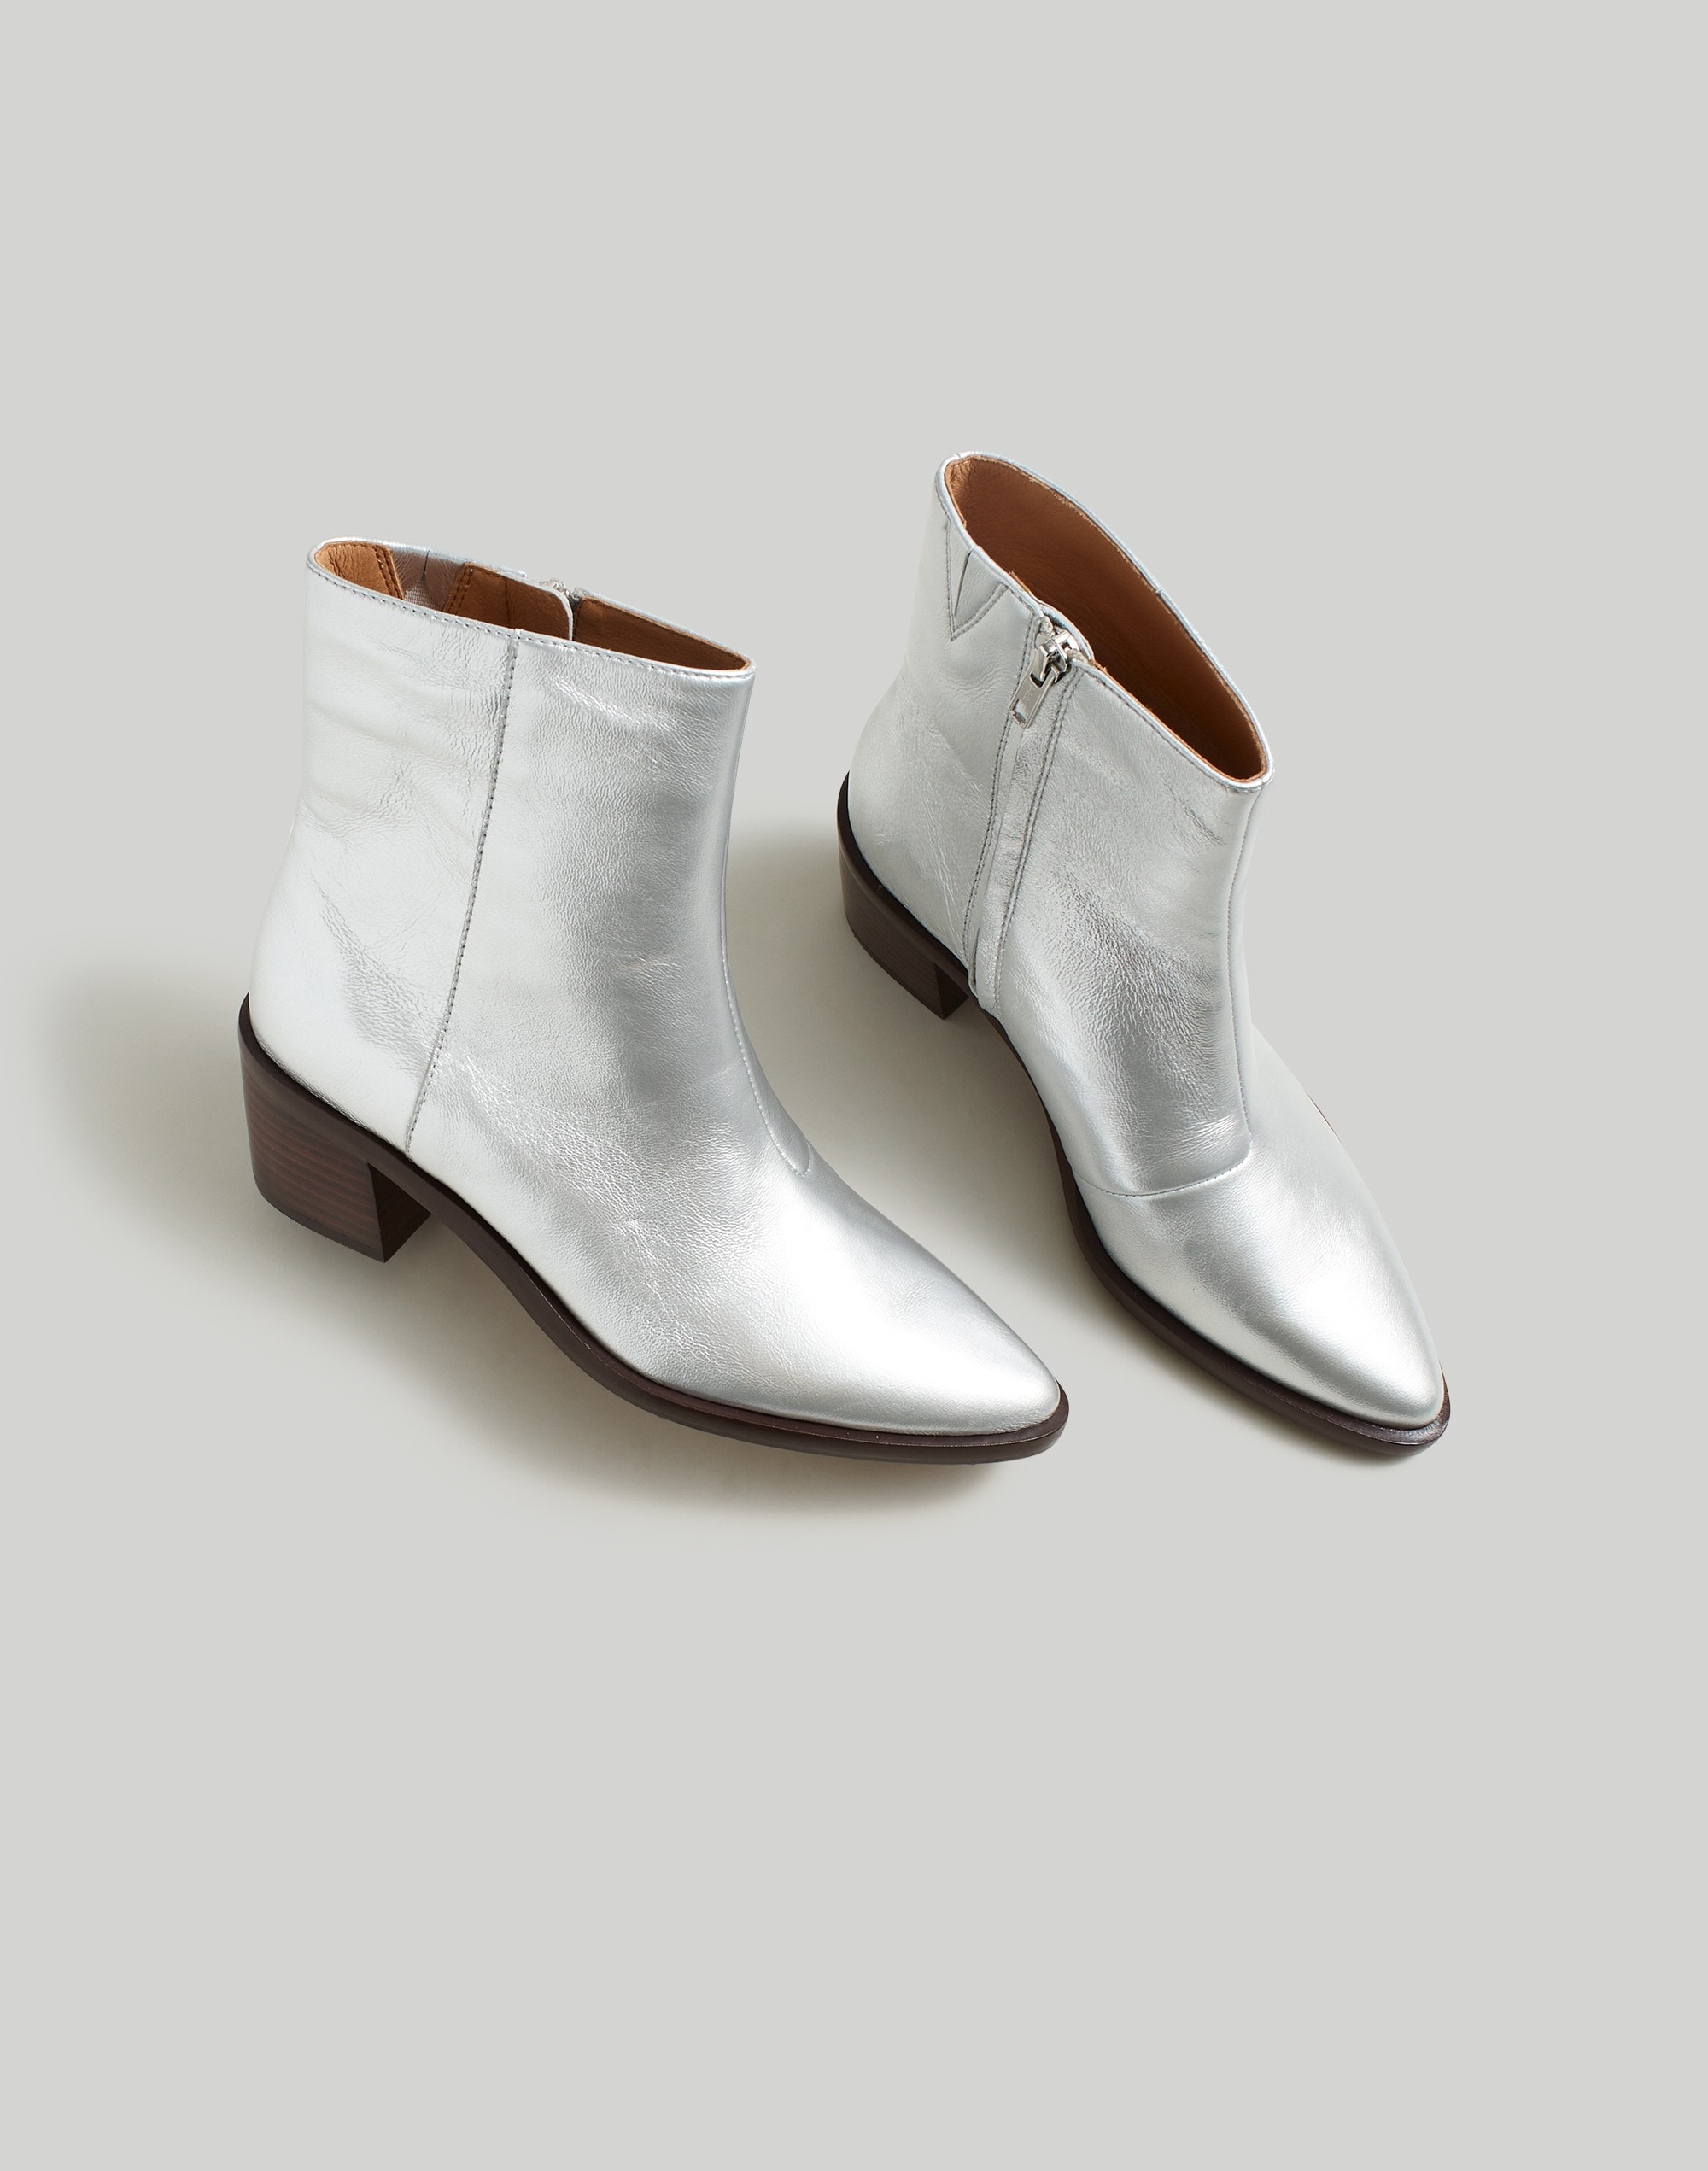 The Darcy Ankle Boot Leather